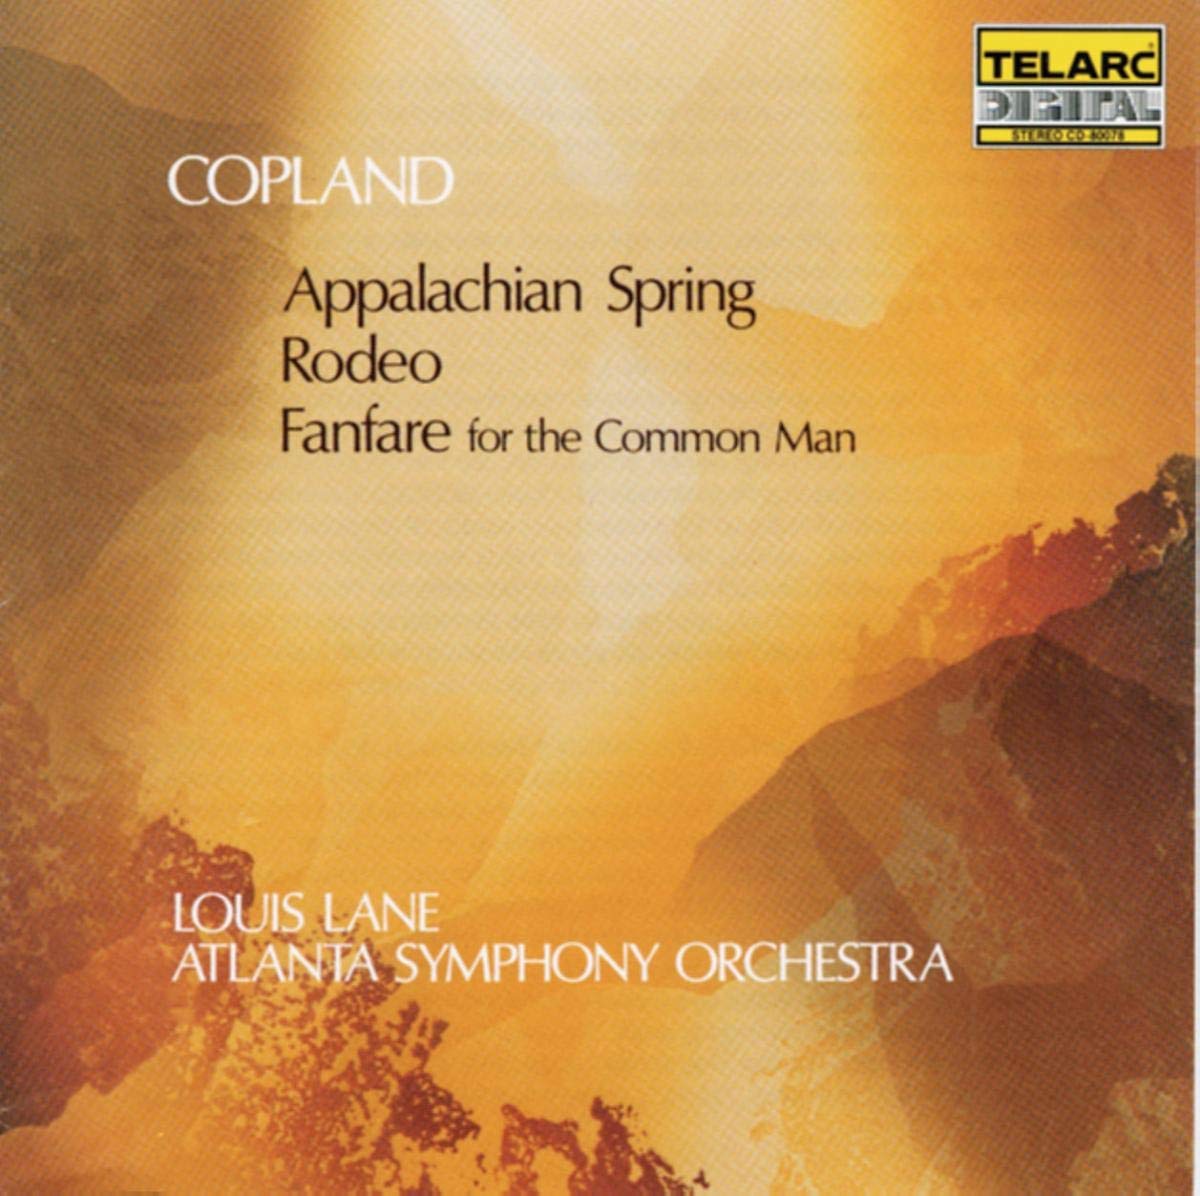 COPLAND: APPALACHIAN SPRING; FANFARE FOR THE COMMON MAN; RODEO - Atlanta Symphony Orchestra, Louis Lane